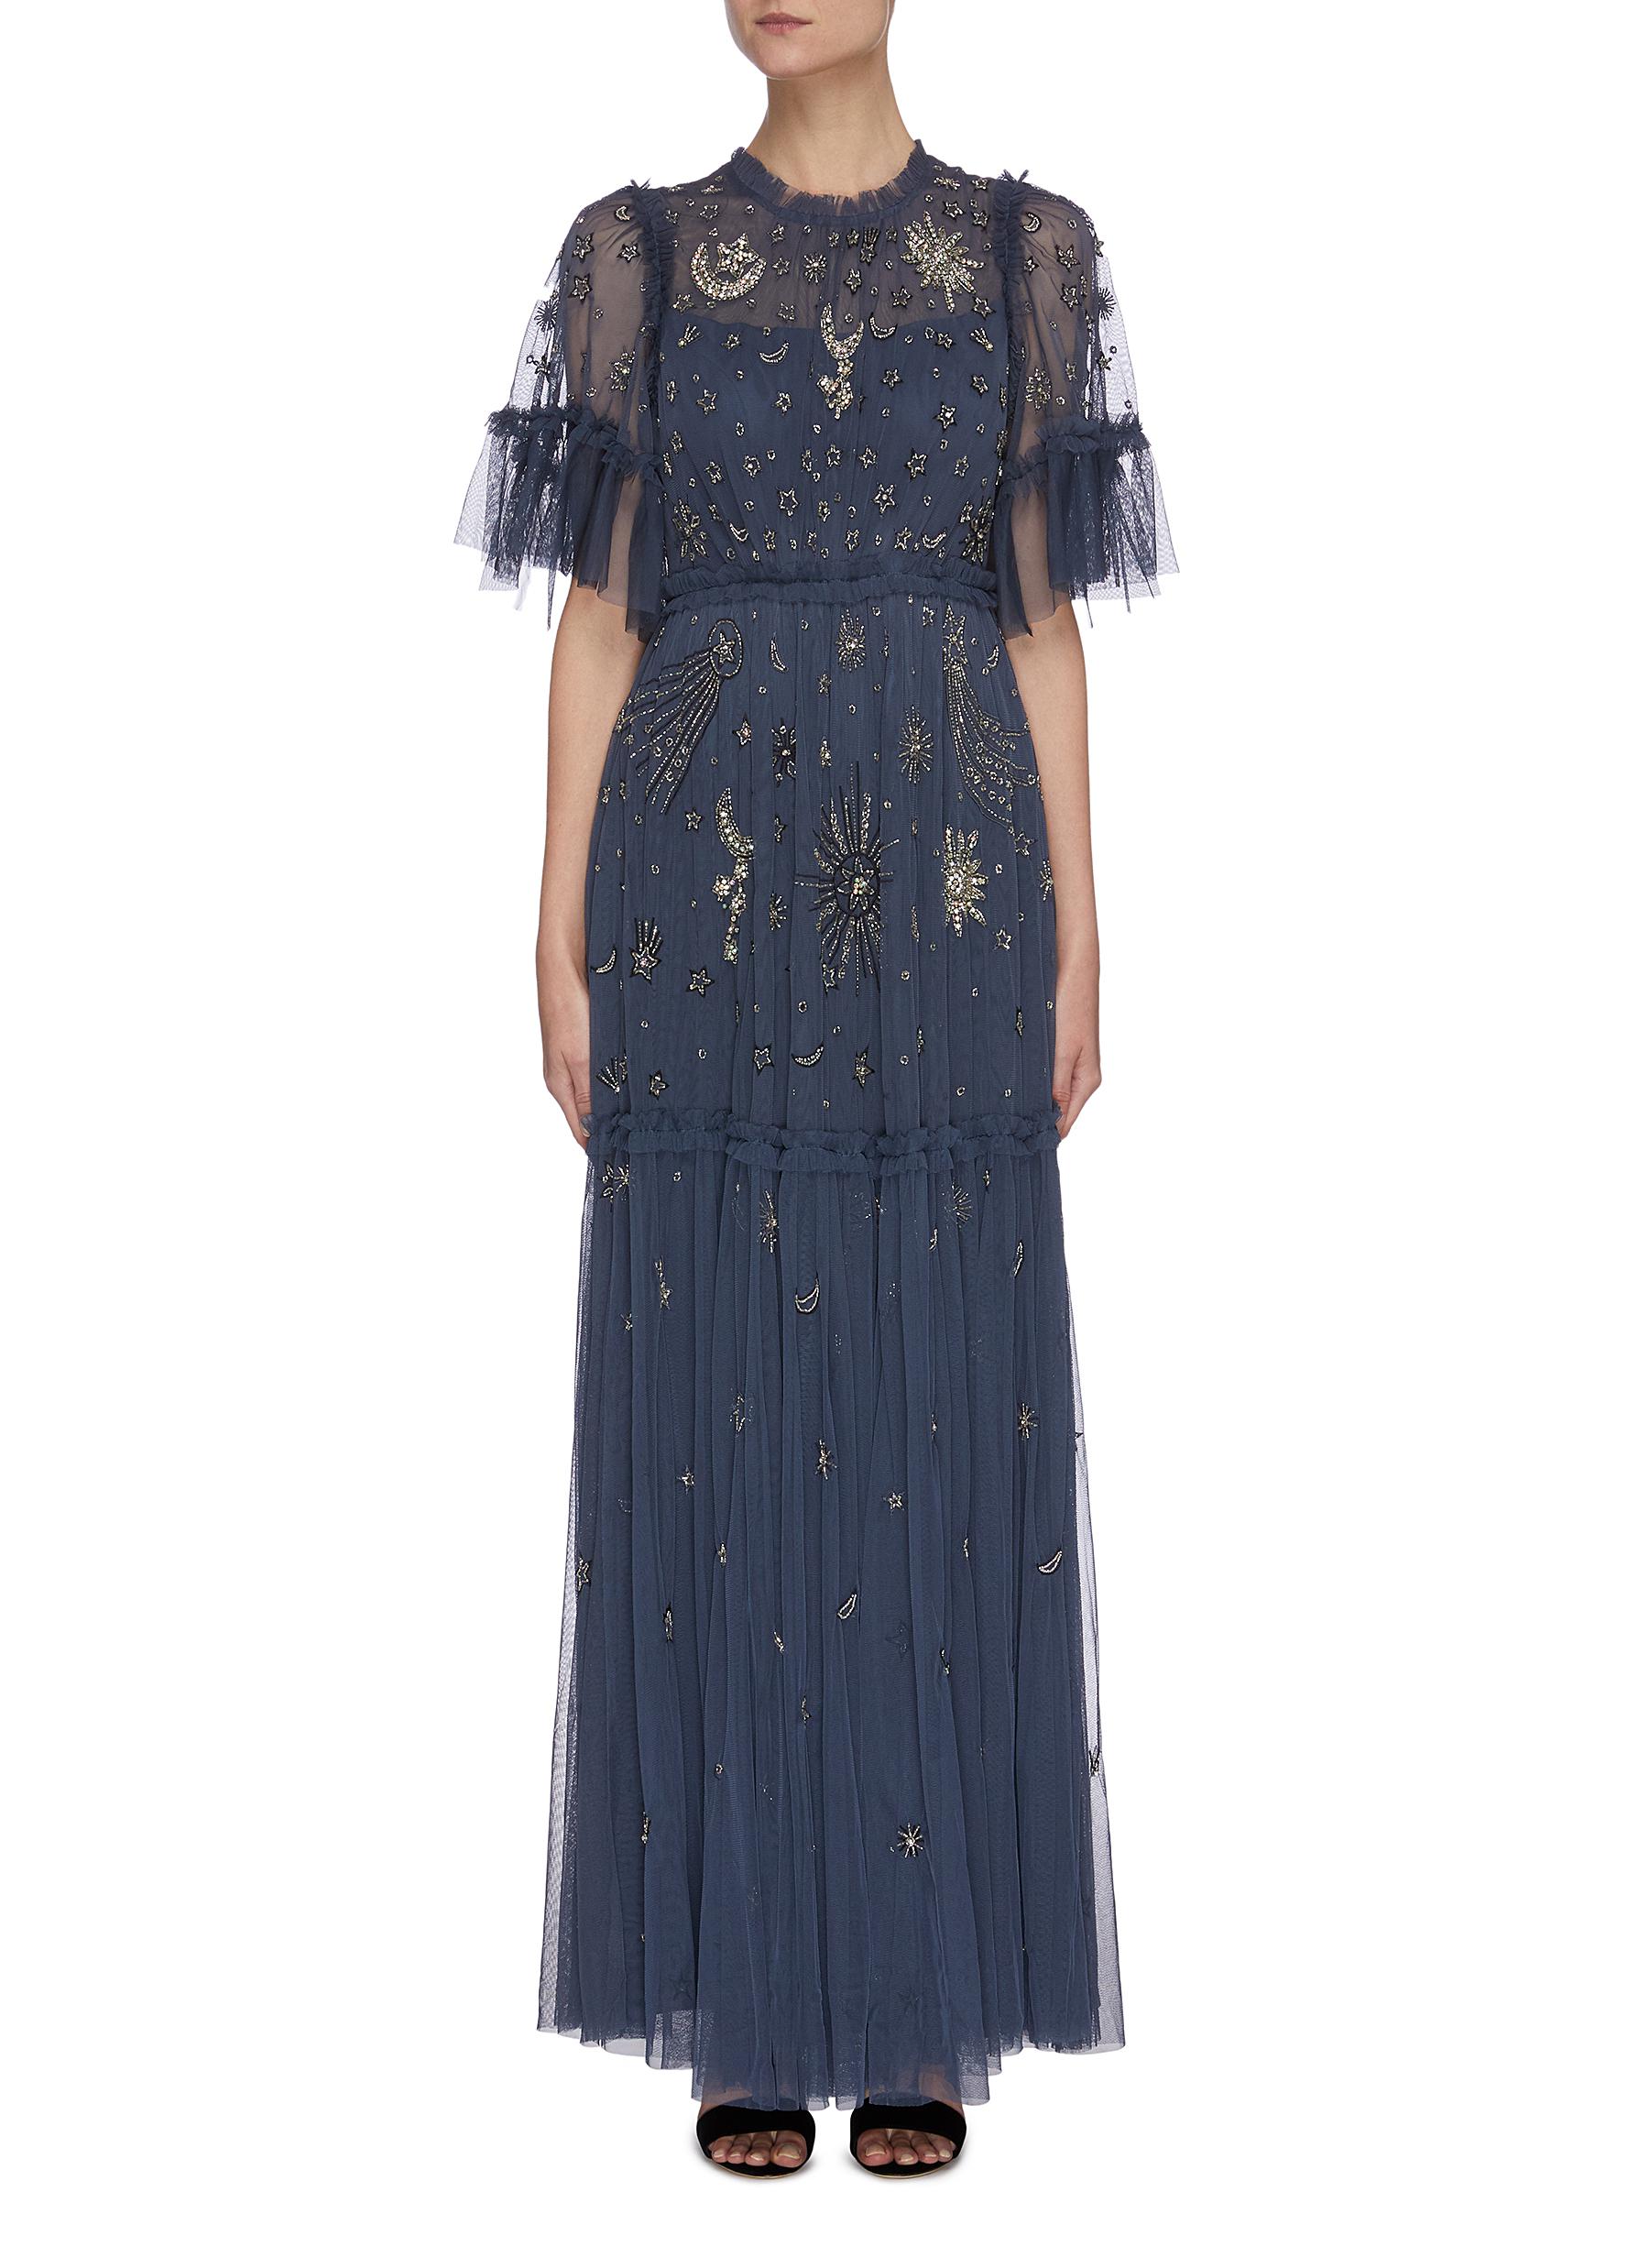 NEEDLE & THREAD 'ETHER' GALAXY STARS BEAD EMBELLISHED GOWN